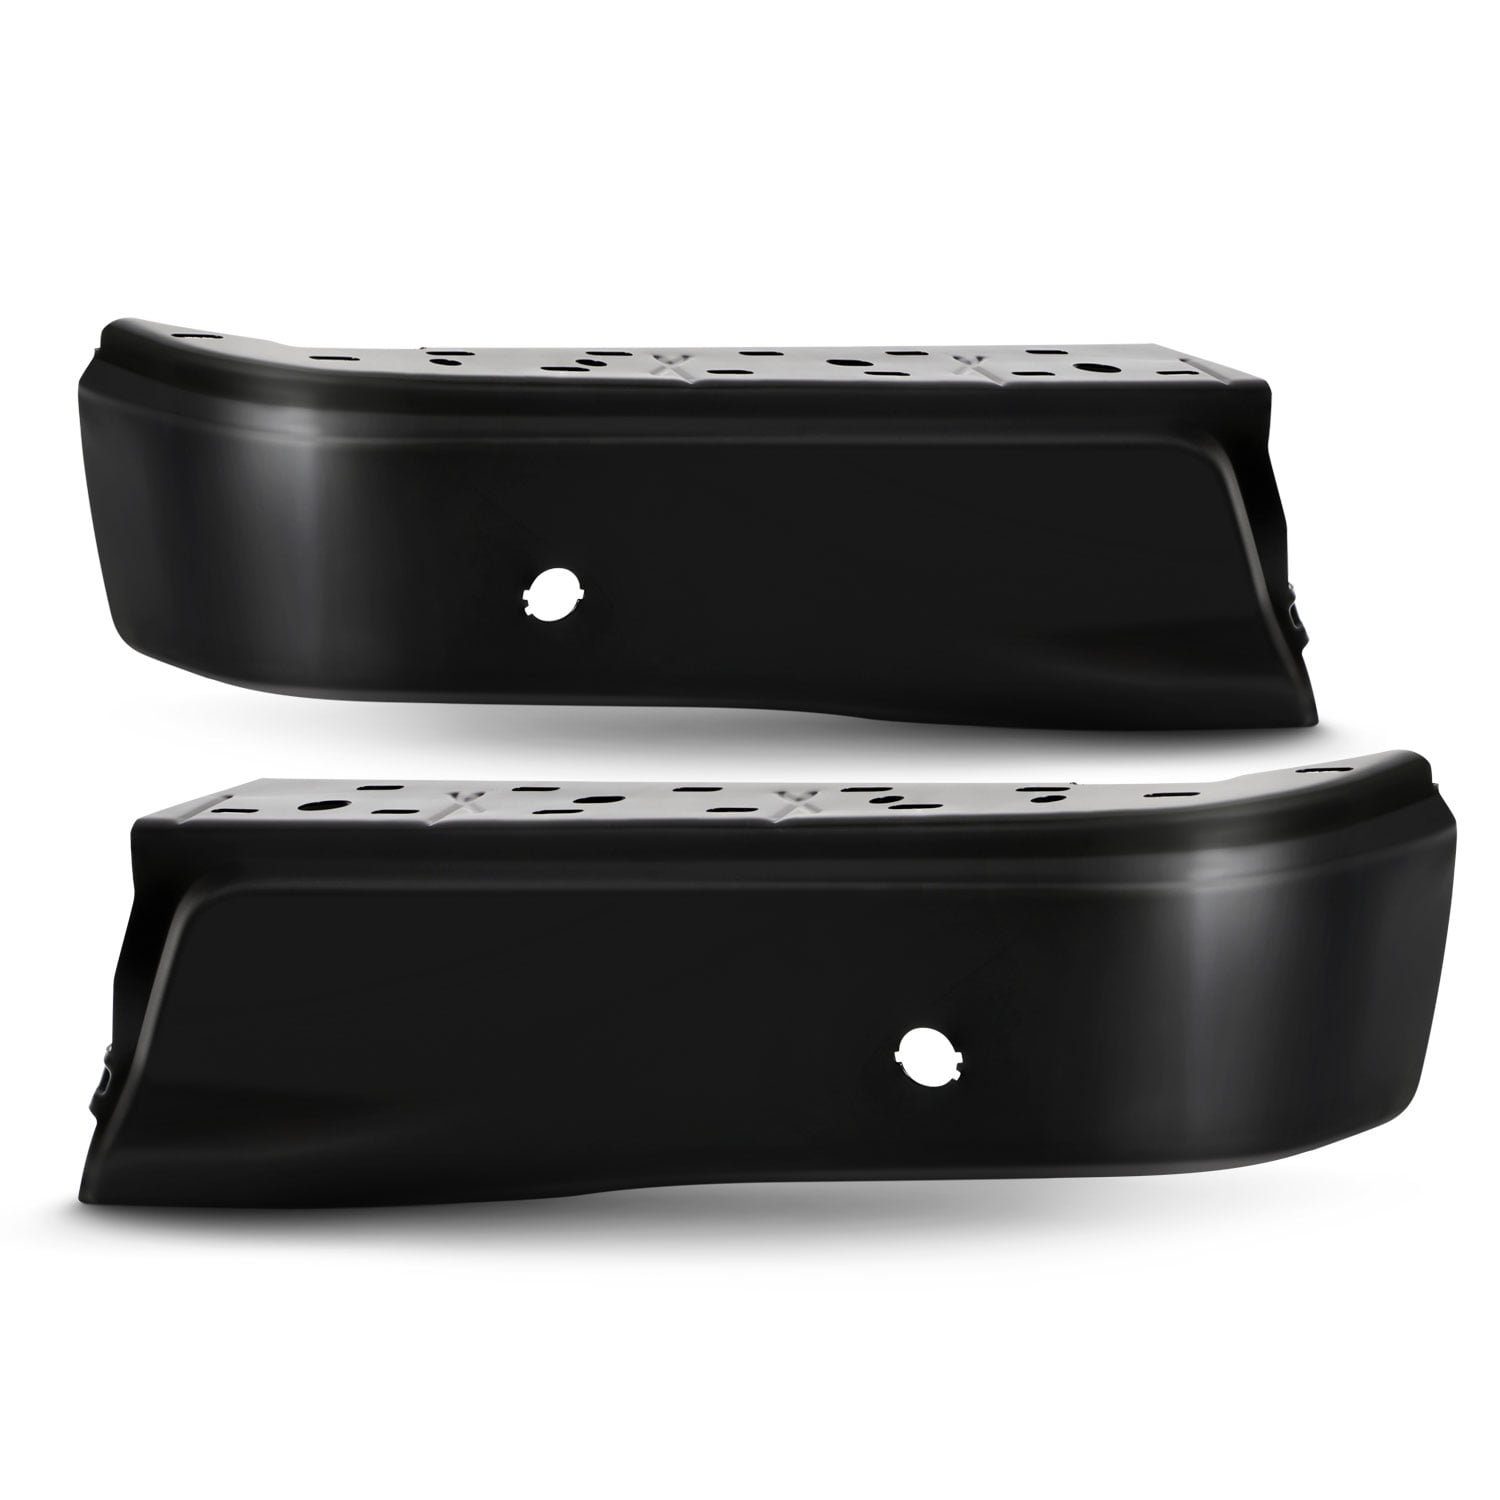 Primered Steel Pair of Left & Right Rear Bumper End Caps for 2009-2014 Ford F-150 w/Park Assist 09-14 FO1102373 BUMPERS THAT DELIVER 